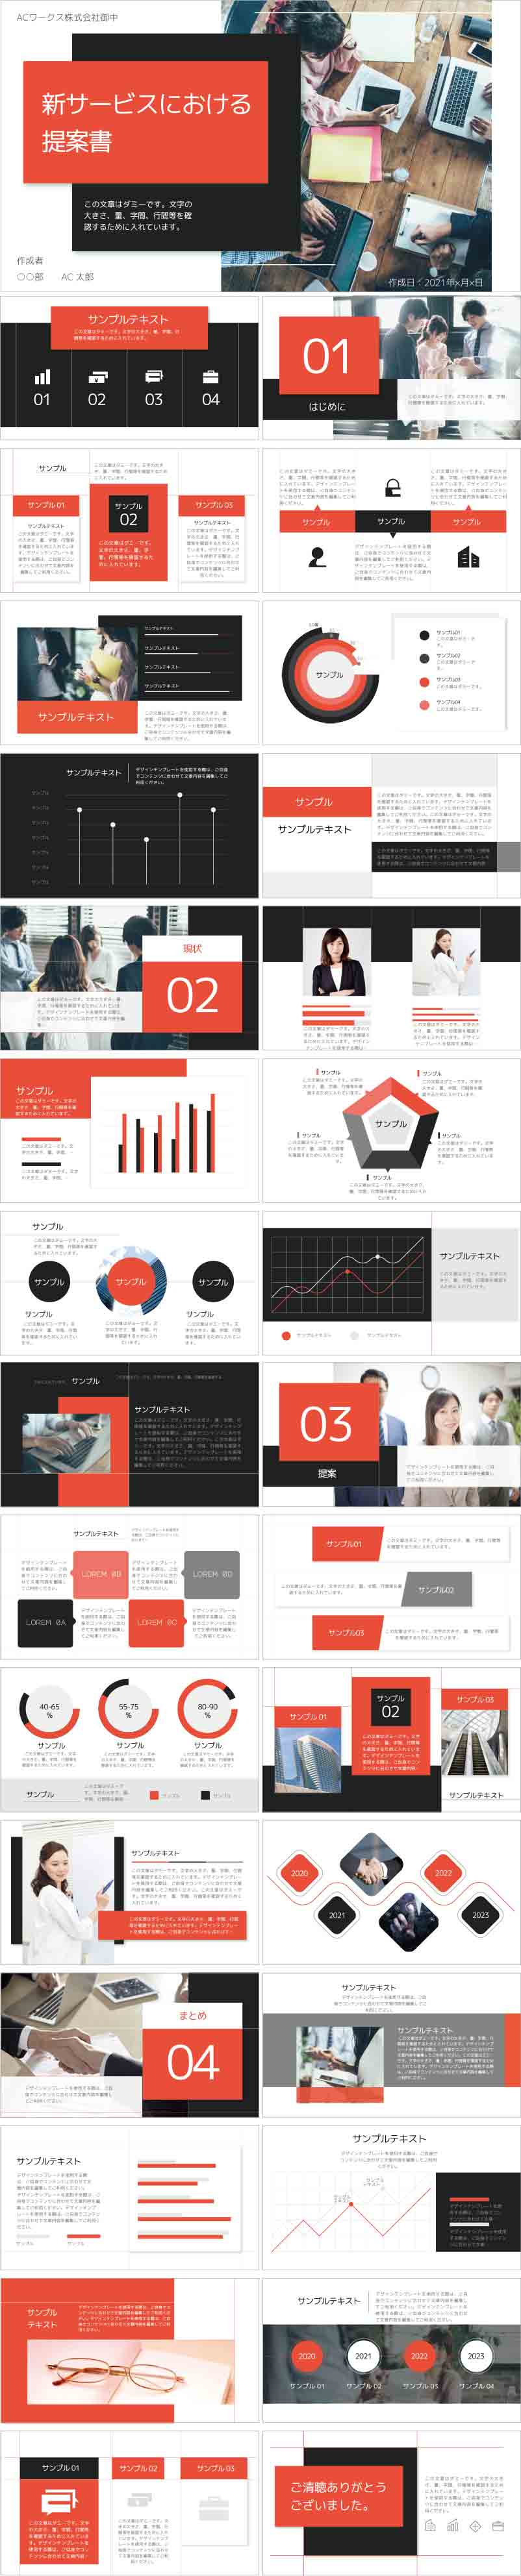 PowerPoint template vol.69